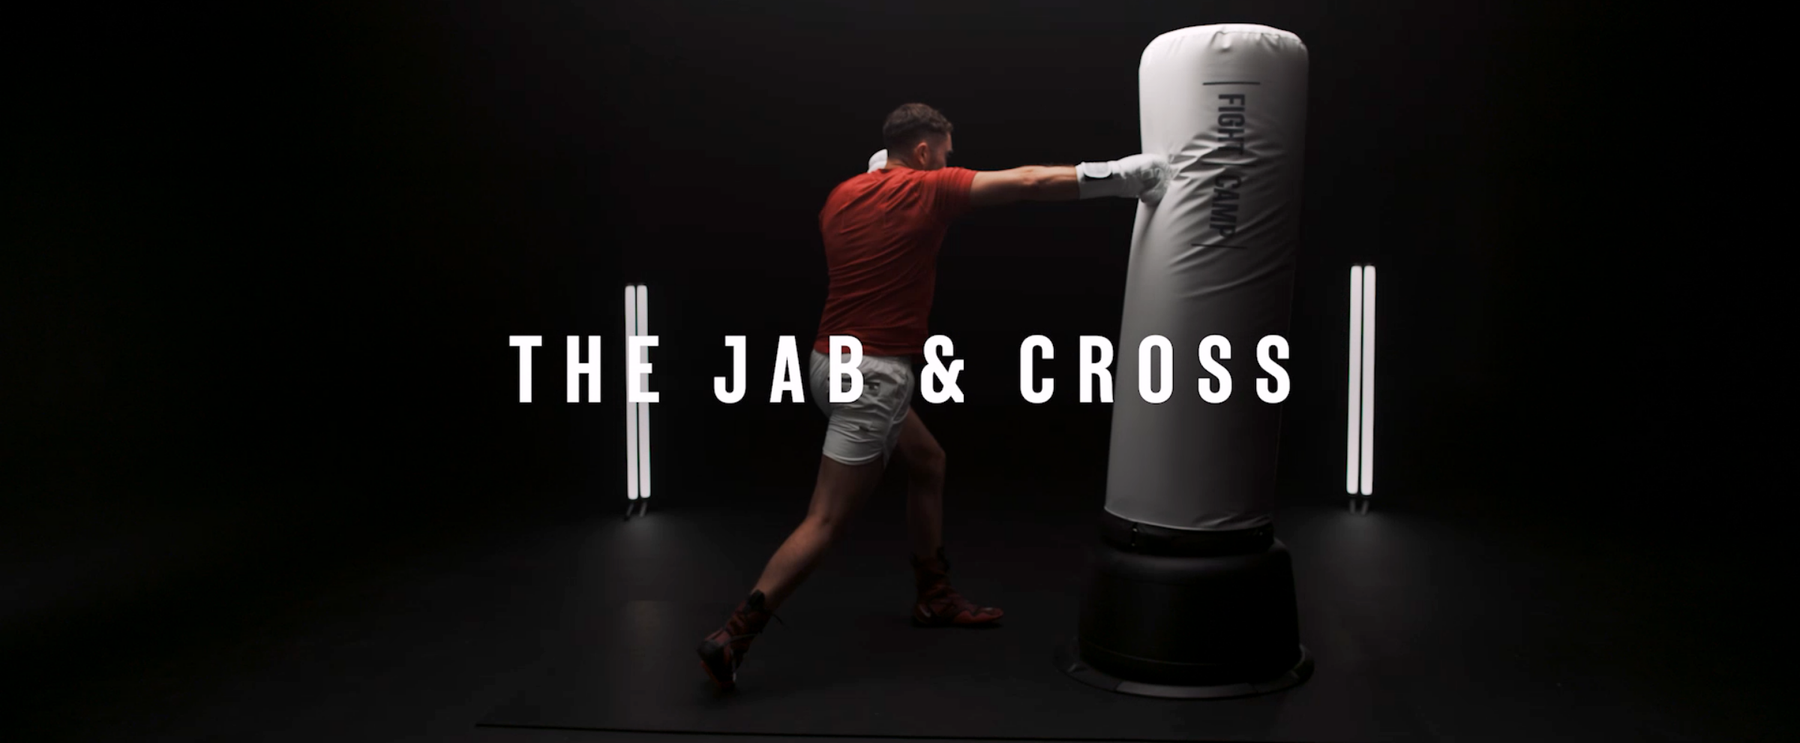 How To Throw Boxing Jab & Cross Punches